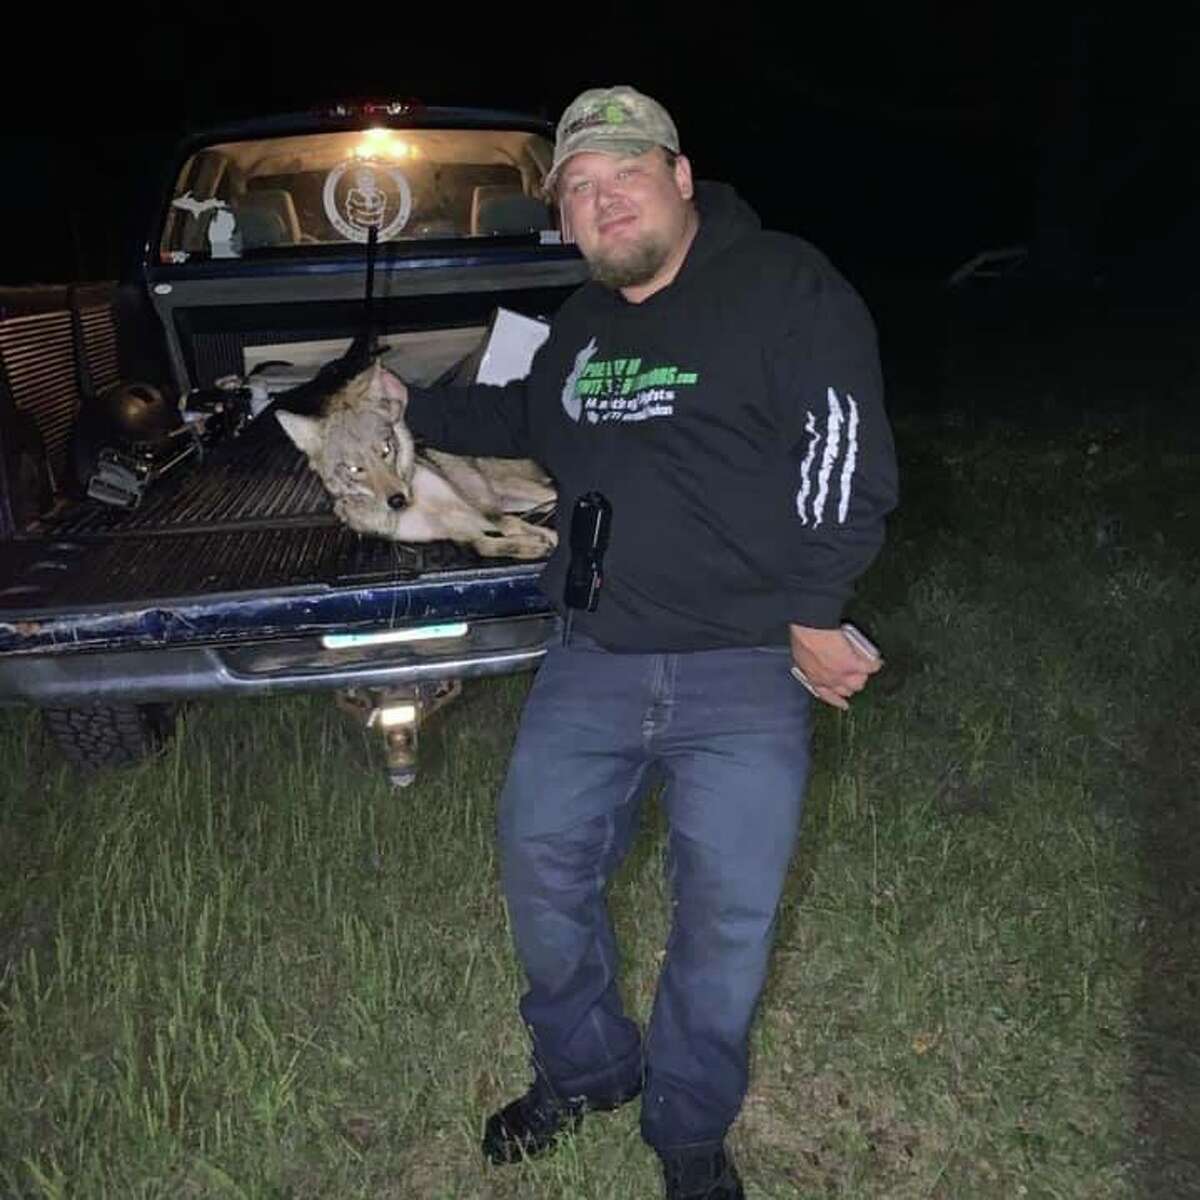 Shawn Allen is a predator hunter who mainly hunts coyotes for local animals owners and for sport.